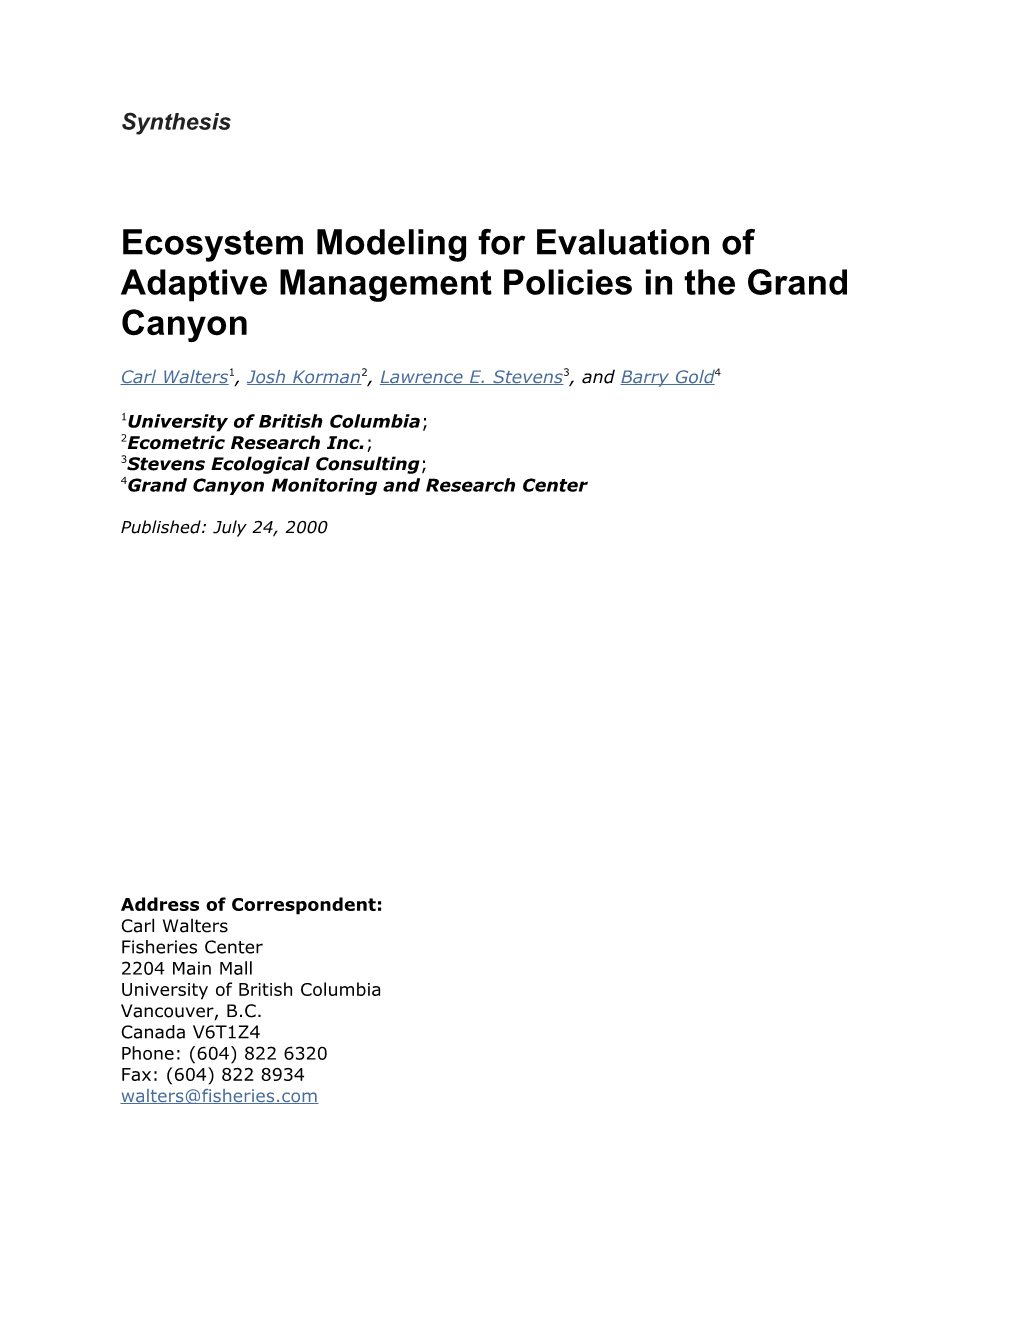 Ecosystem Modeling for Evaluation of Adaptive Management Policies in the Grand Canyon